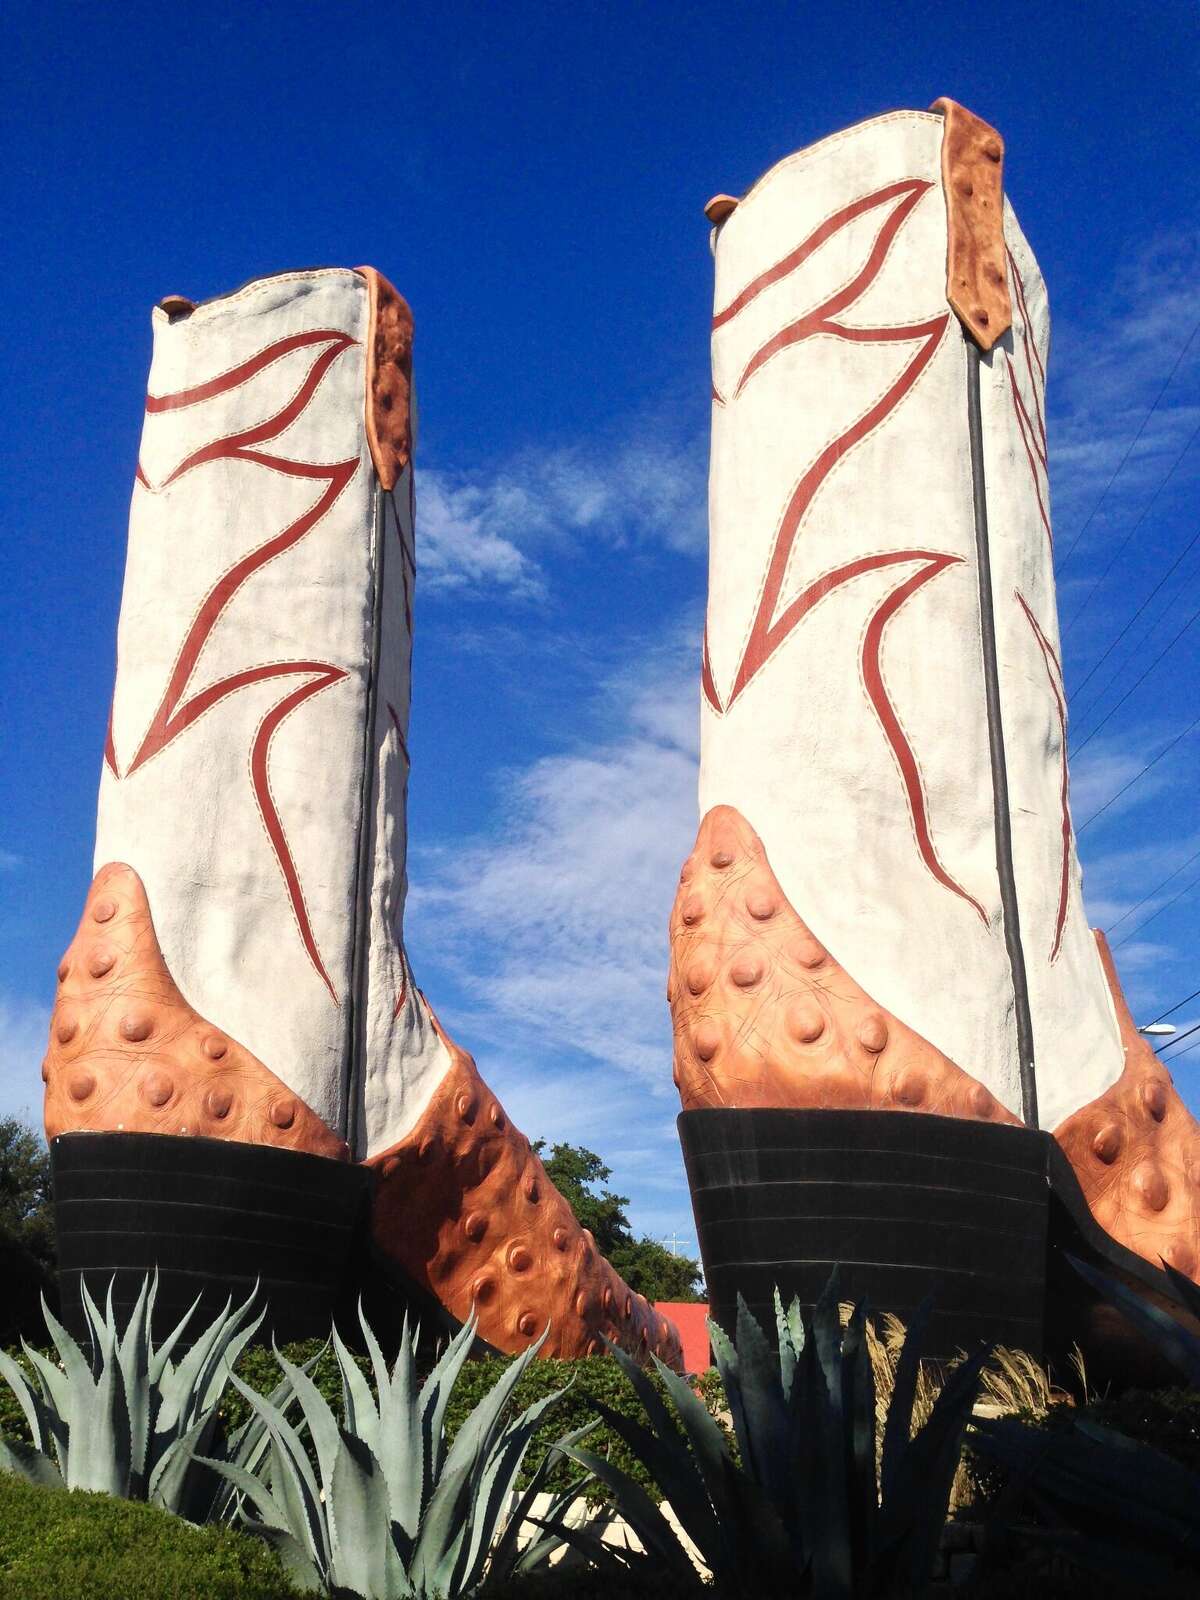 The largest cowboy boot sculpture in the world in San Antonio, Texas.